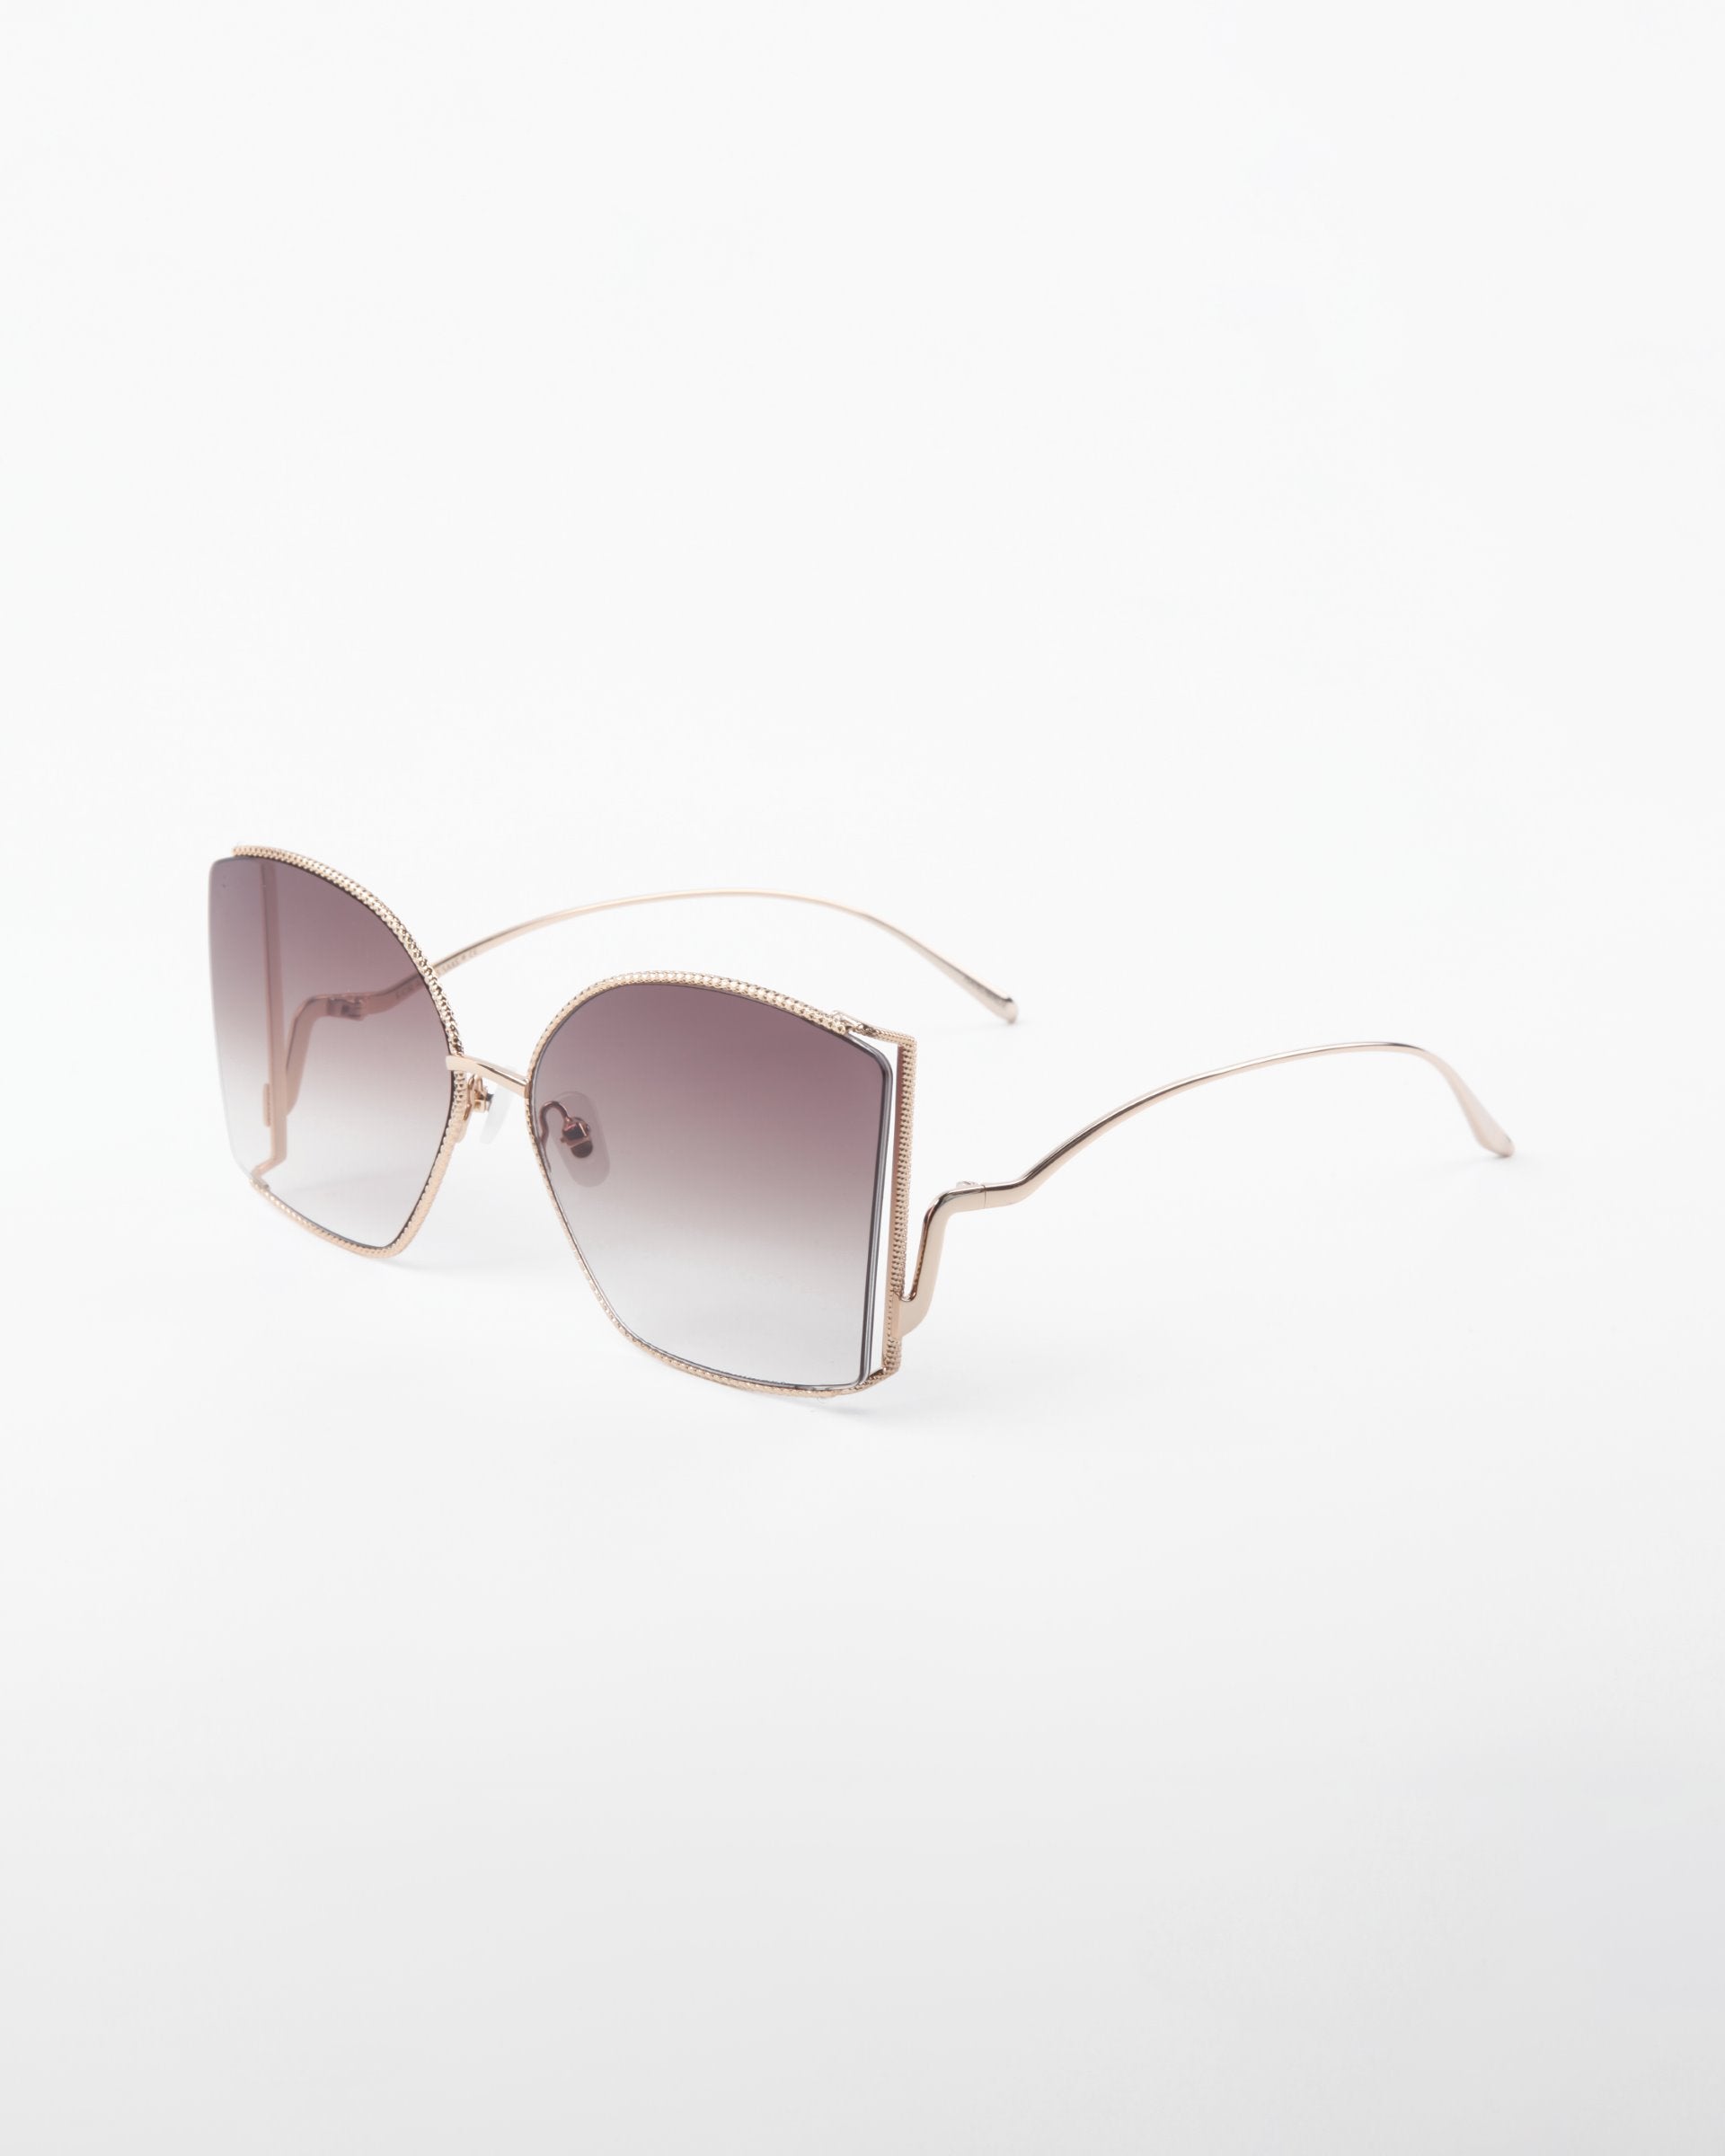 A pair of stylish, oversized For Art&#39;s Sake® Dixie sunglasses featuring UV protection and a thin, handmade gold-plated frame. The shatter-resistant nylon lenses boast a gradient fade from a darker tint at the top to a lighter tint at the bottom, with an elegant curve at the nose bridge and curved temple tips.